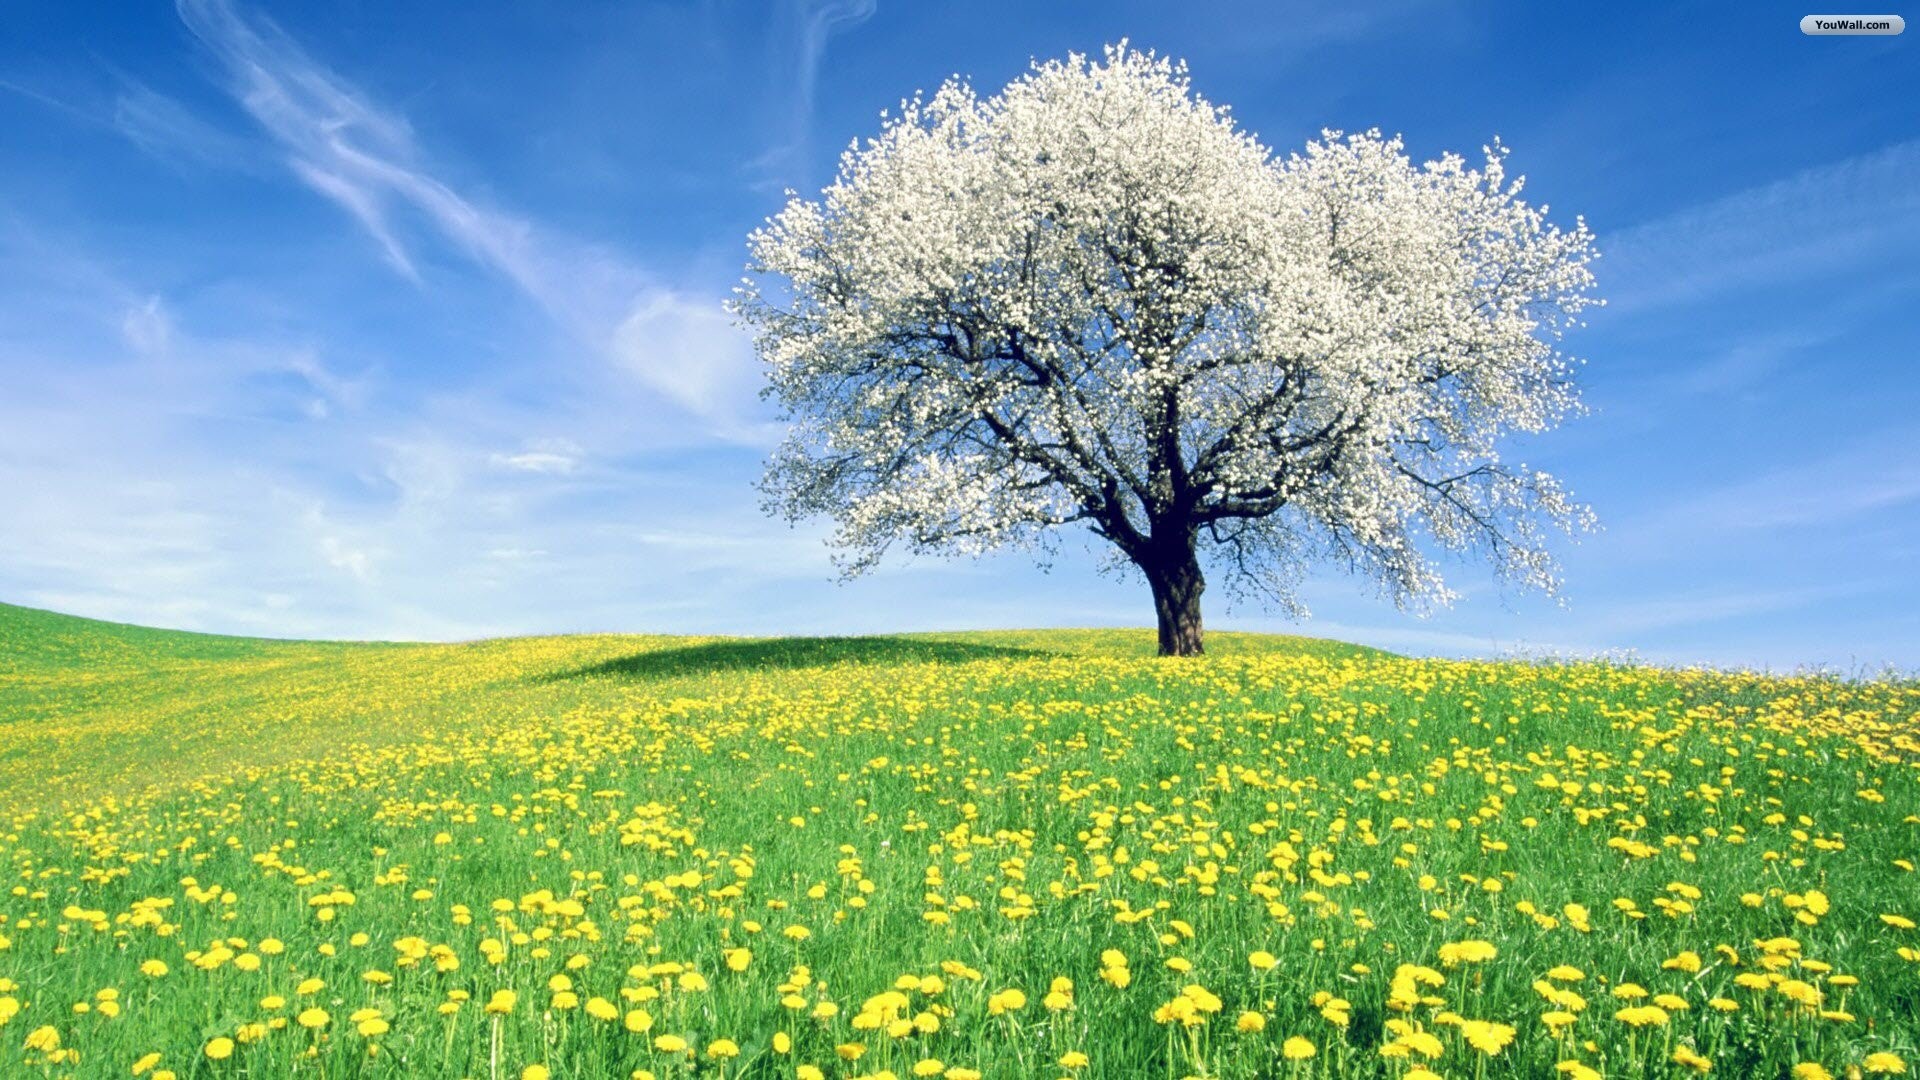 Spring Meadow Wallpaper (63+ images)